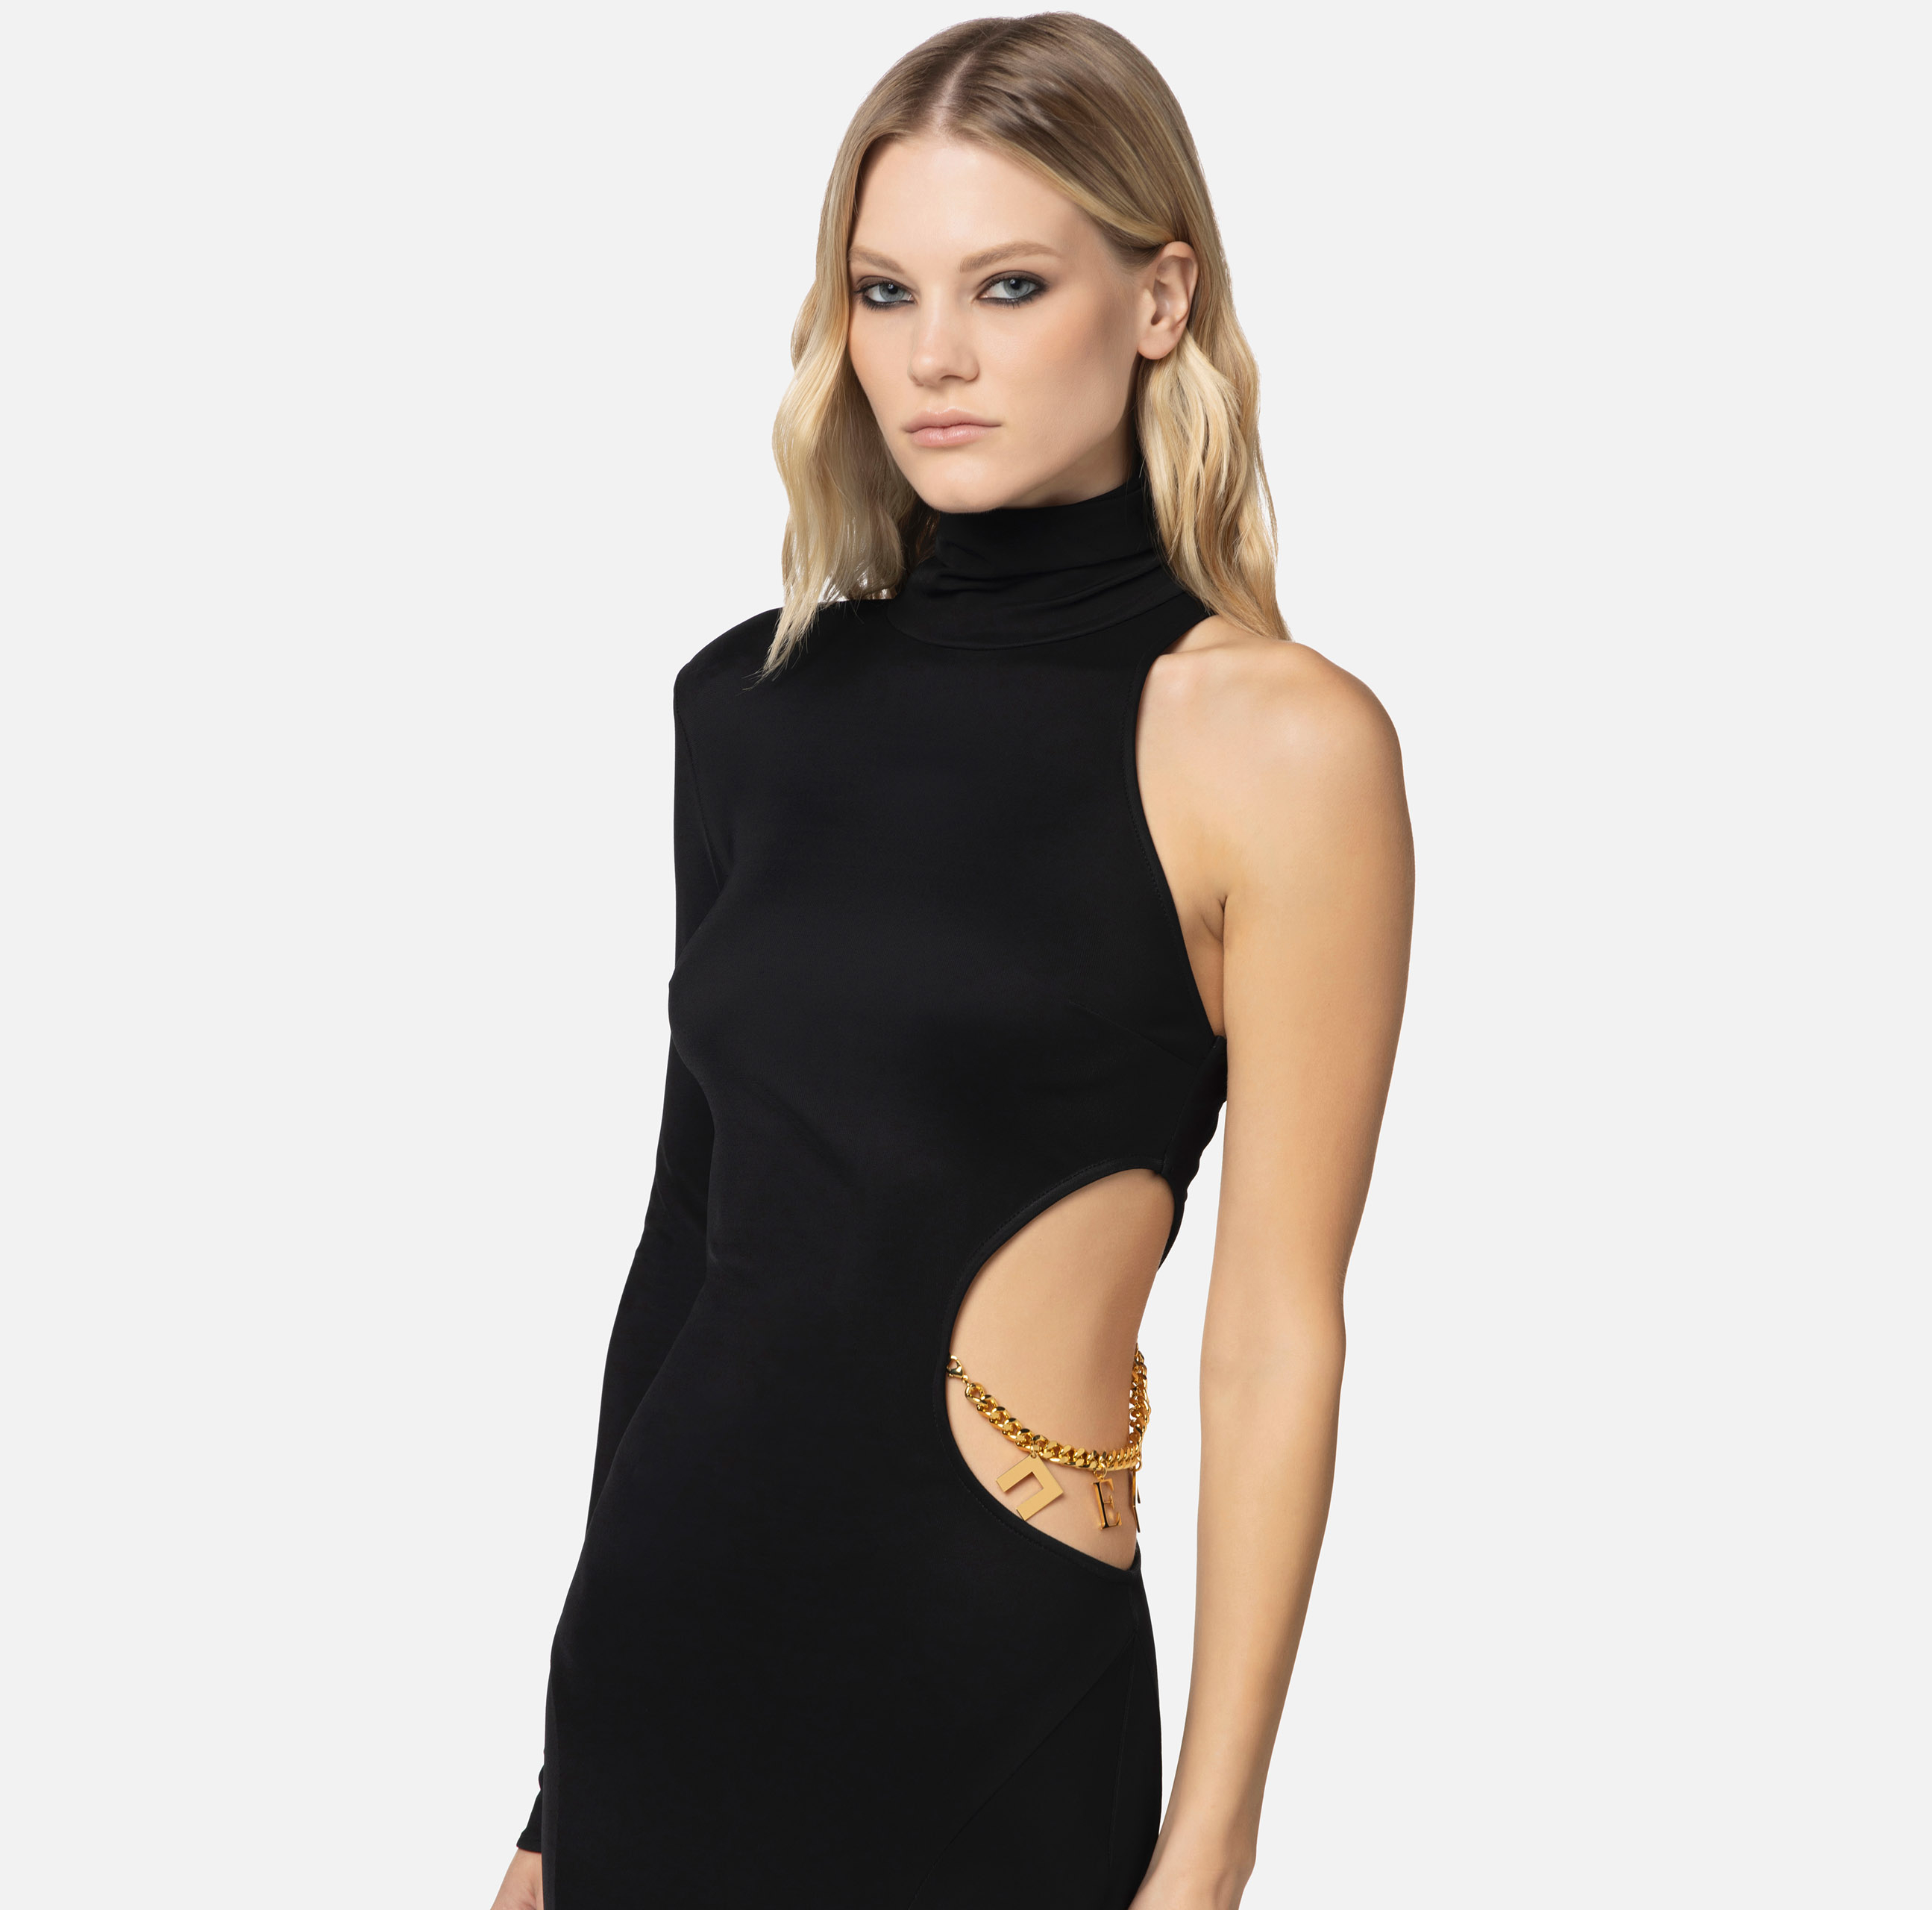 Red carpet one-shoulder dress in shiny jersey with cut-outs - Elisabetta Franchi